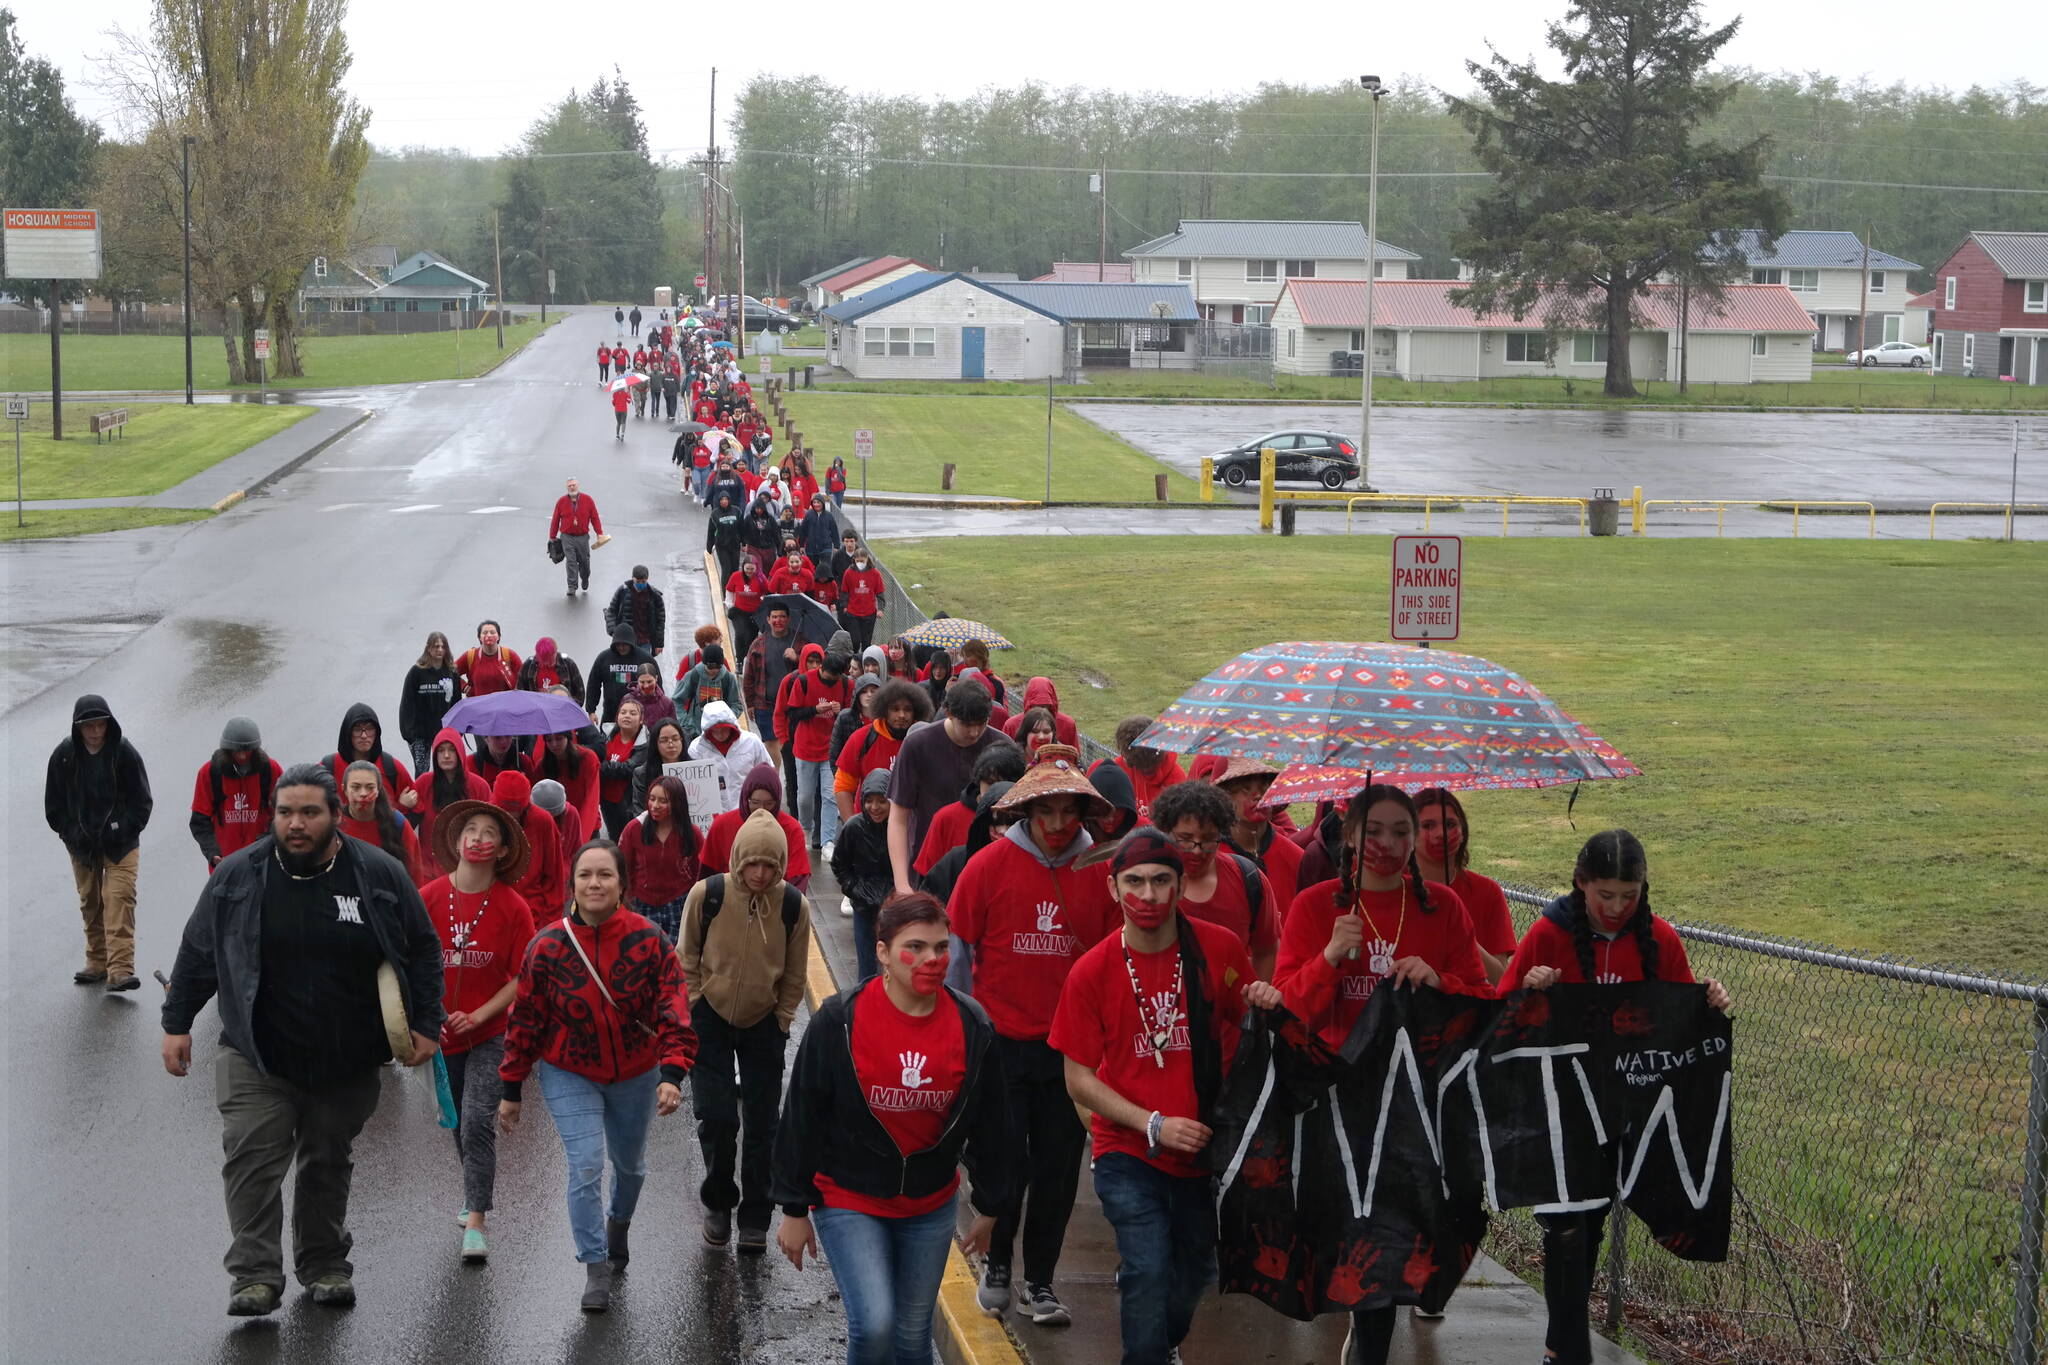 Over 150 students from Hoquiam High School and Hoquiam Middle School participated in an awareness walk for missing and murdered Indigenous women on Thursday, May 5. The event was organized by a group of students from the Native Education program under the guidance of Native Education Coordinator Sandy Ruiz Greenway. Erika Gebhardt I The Daily World